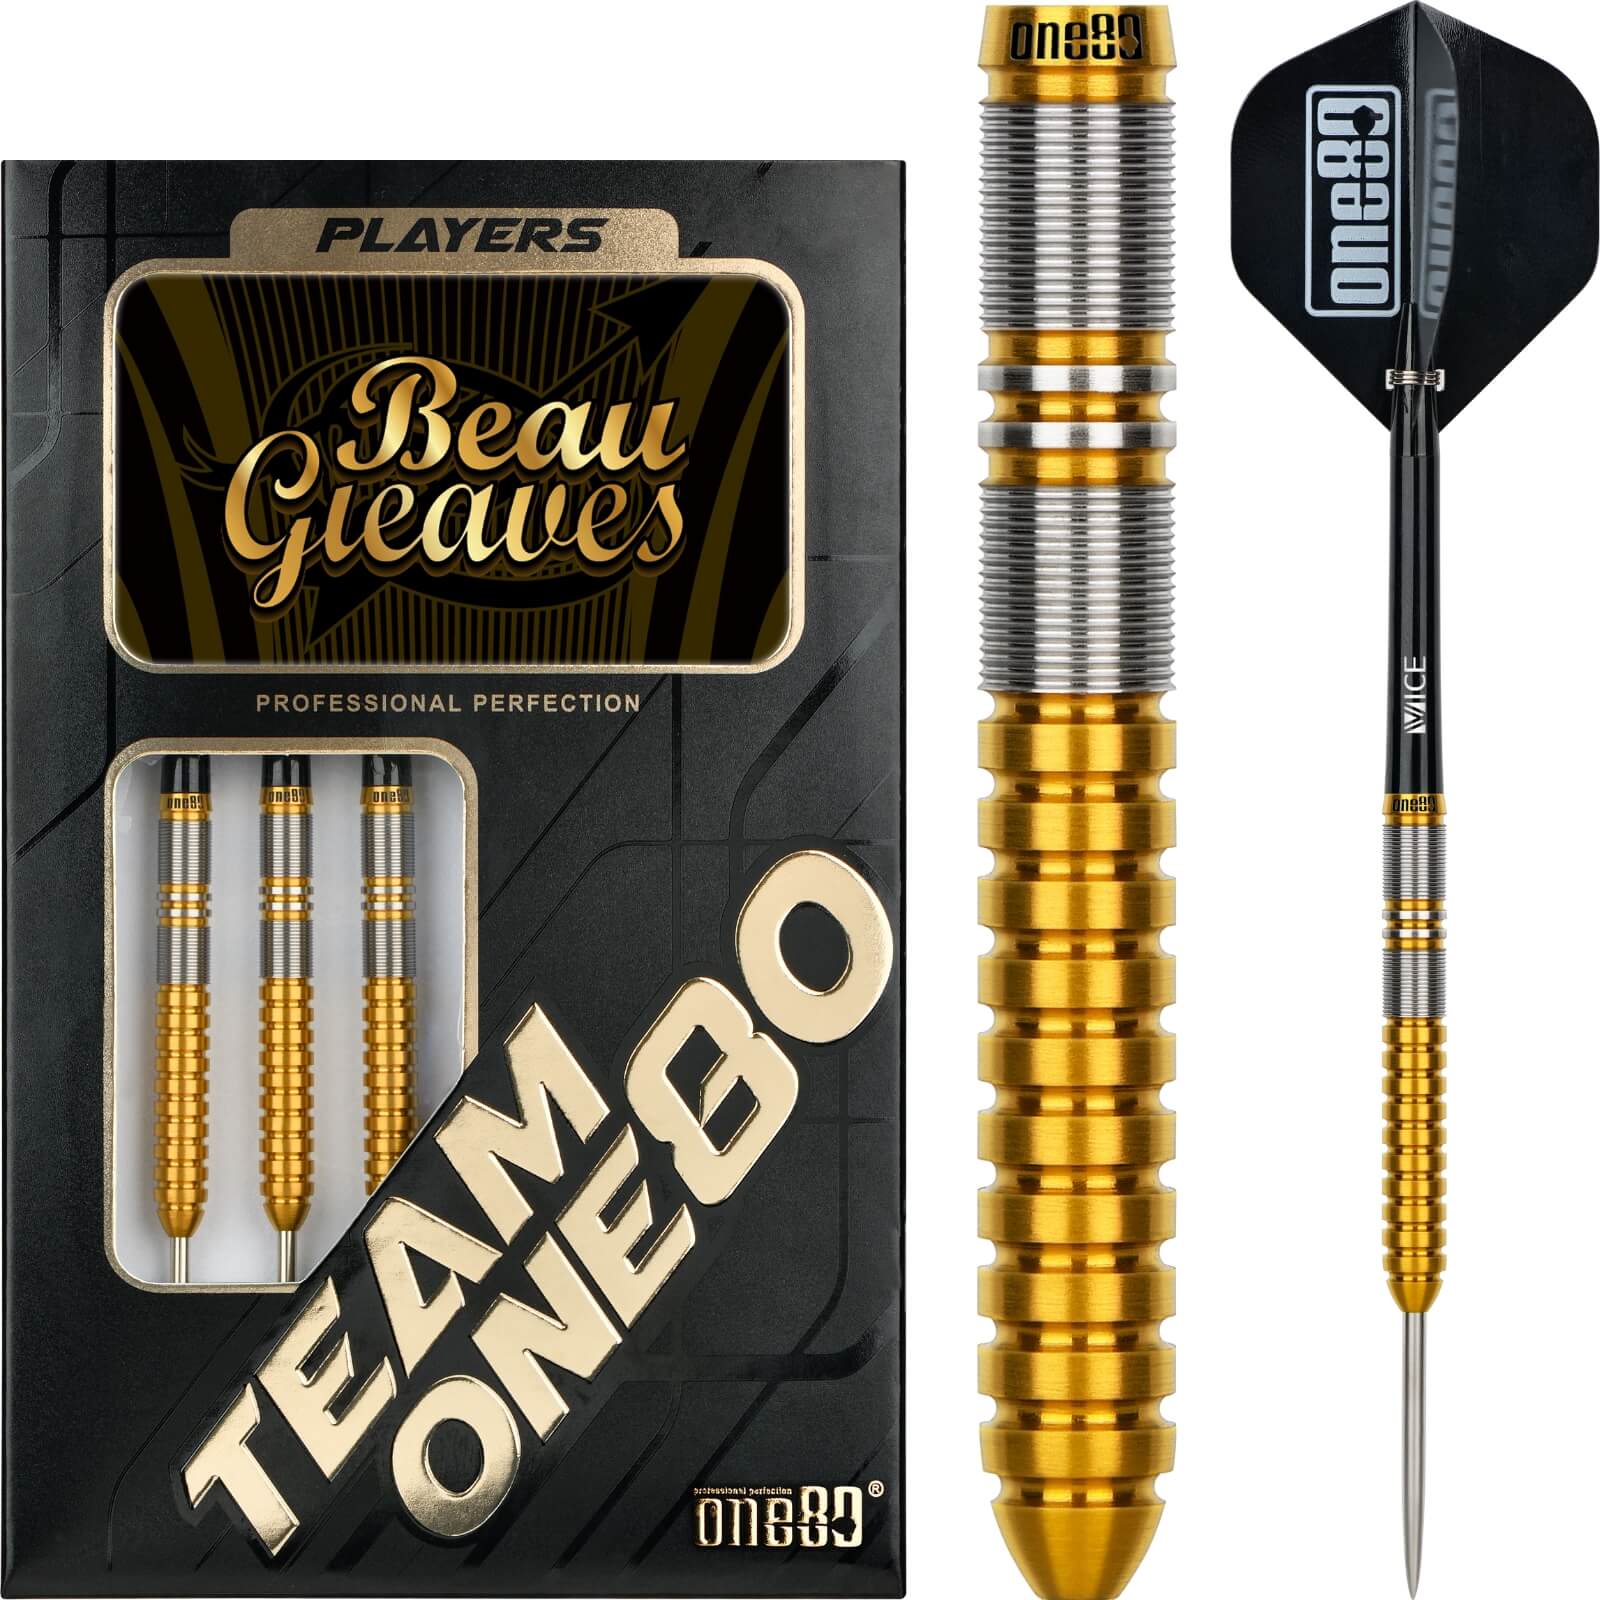 One80 Beau Greaves Gold Darts For Sale 21g 23g Avid Darts Shop